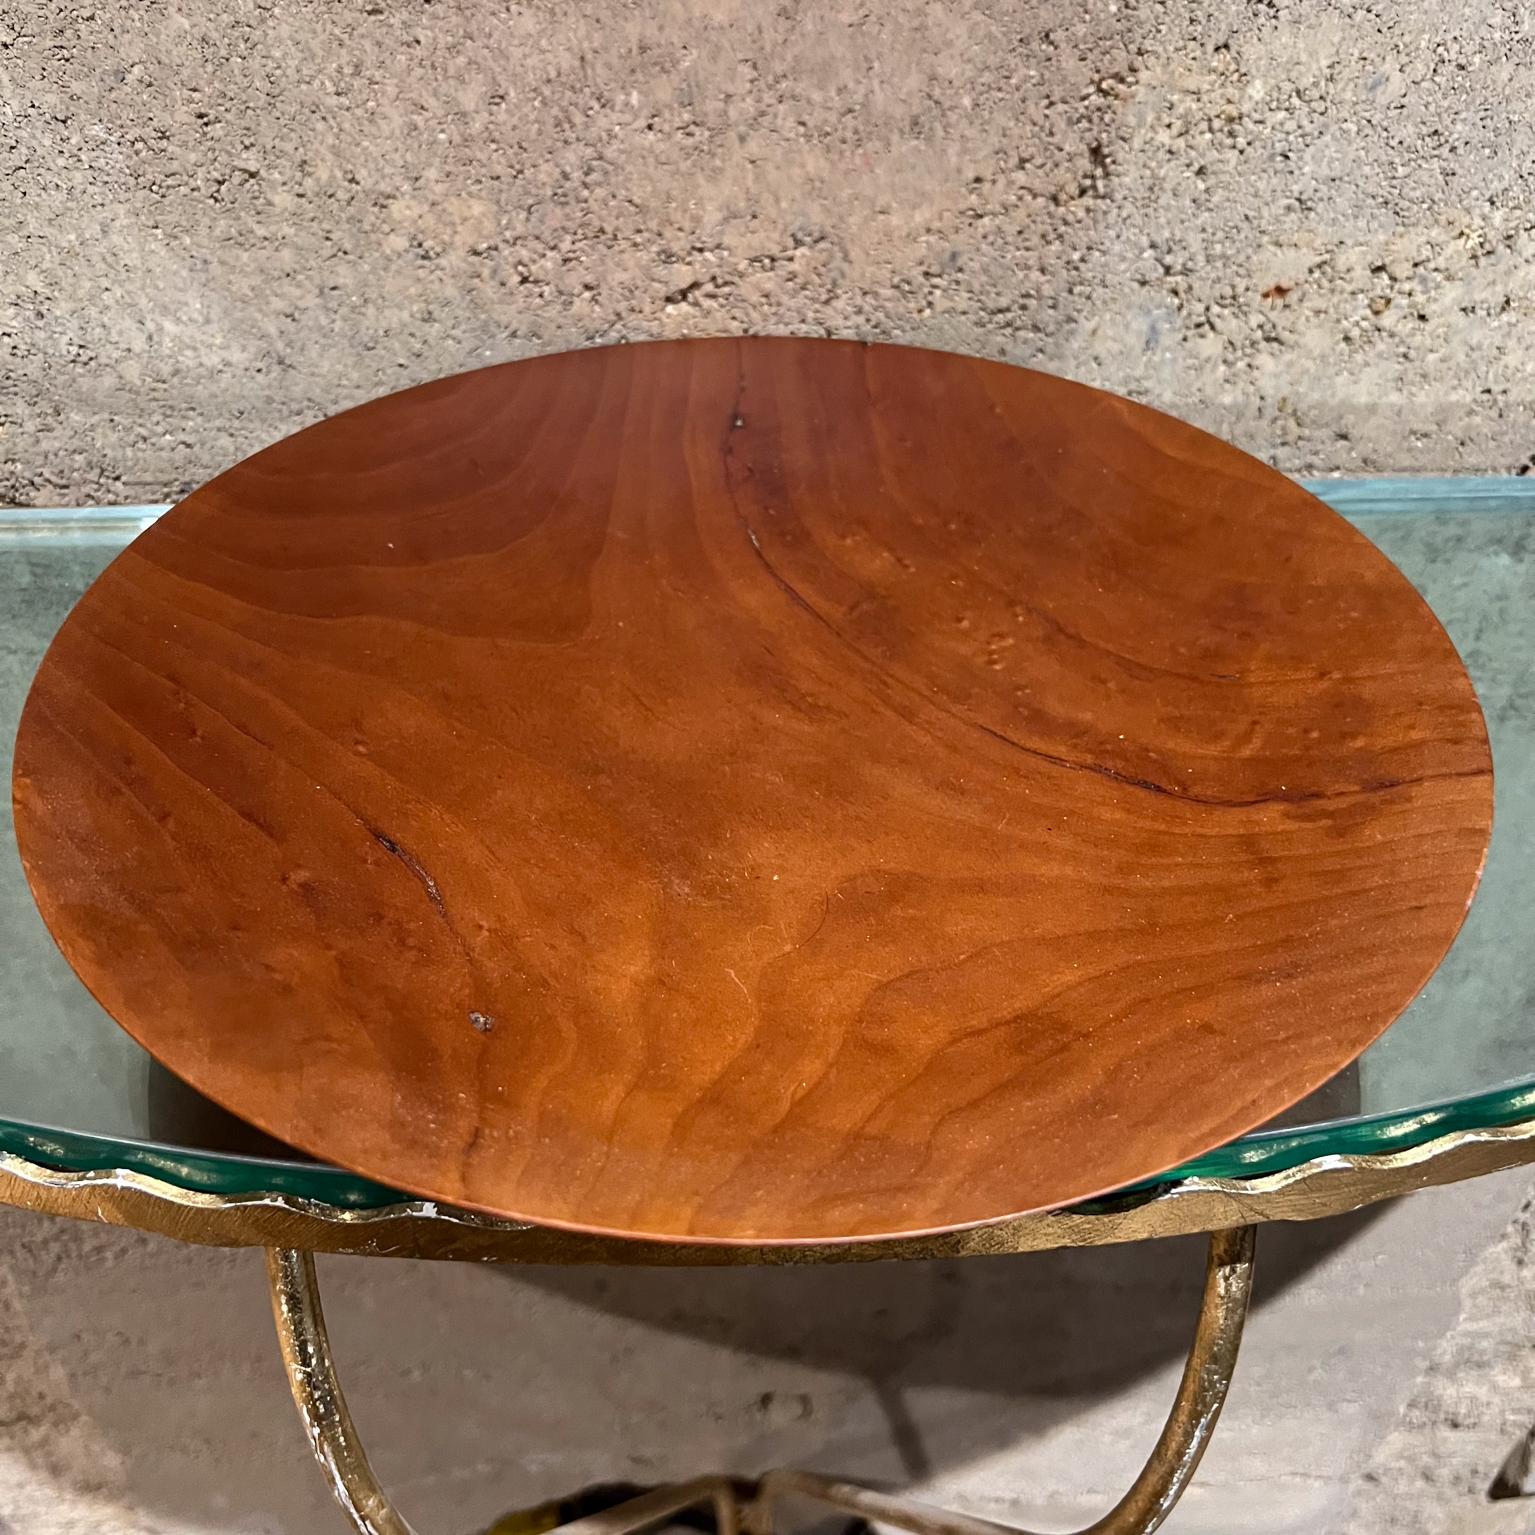 Mid 20th Century Sculptural Cherry Wood Bowl signed
11.5 diameter x 1.5 h
Stamped by artist
Original vintage condition unrestored.
See all images provided.